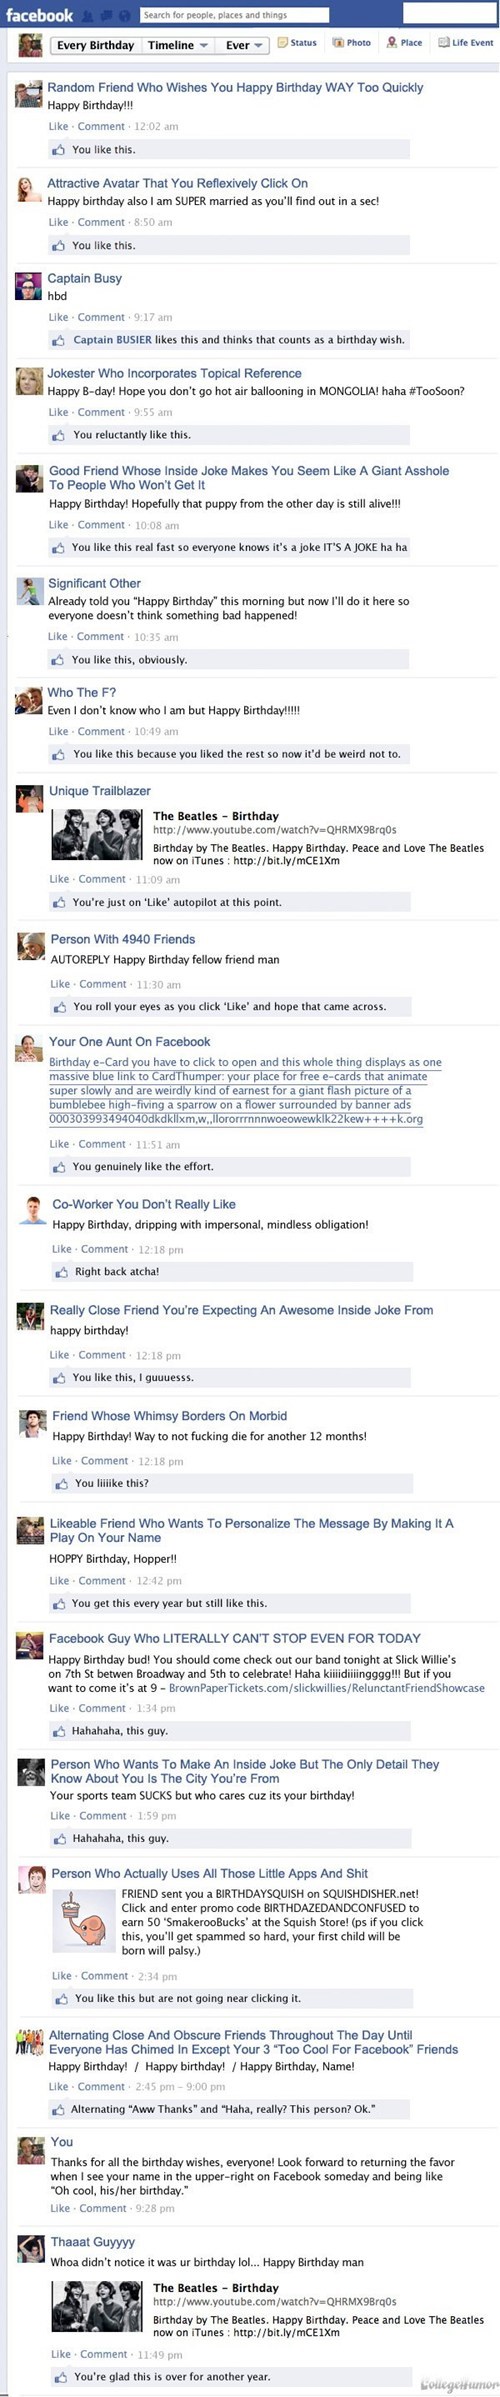 every type of person who wishes you a happy birthday on facebook